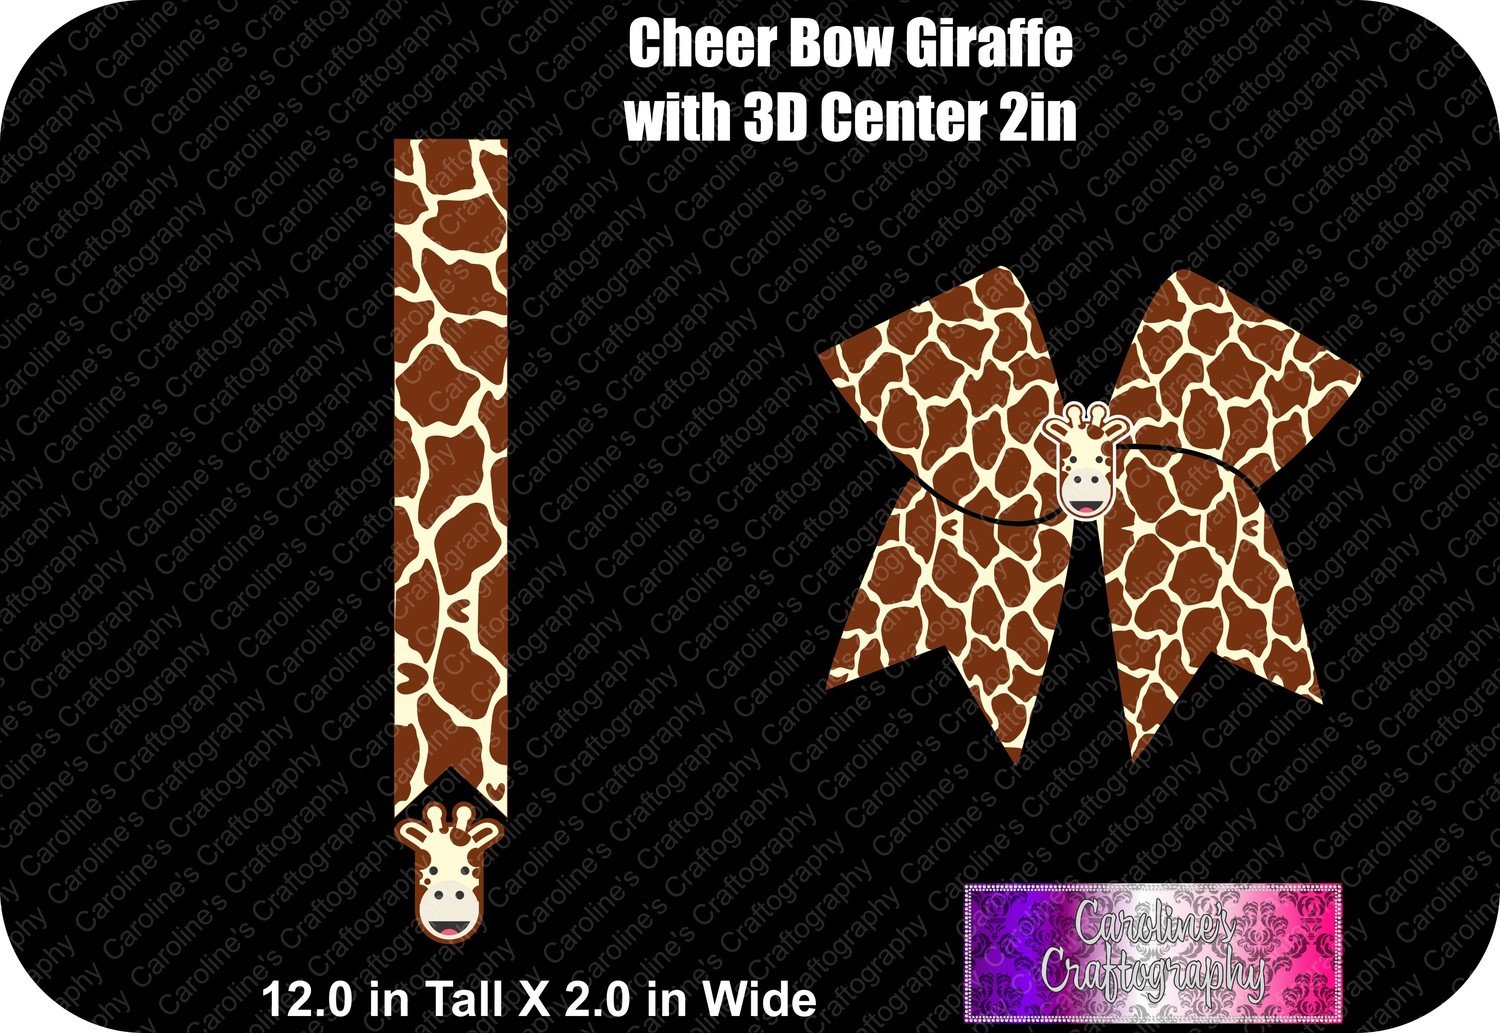 Giraffe 2in with 3D Center Cheer Bow